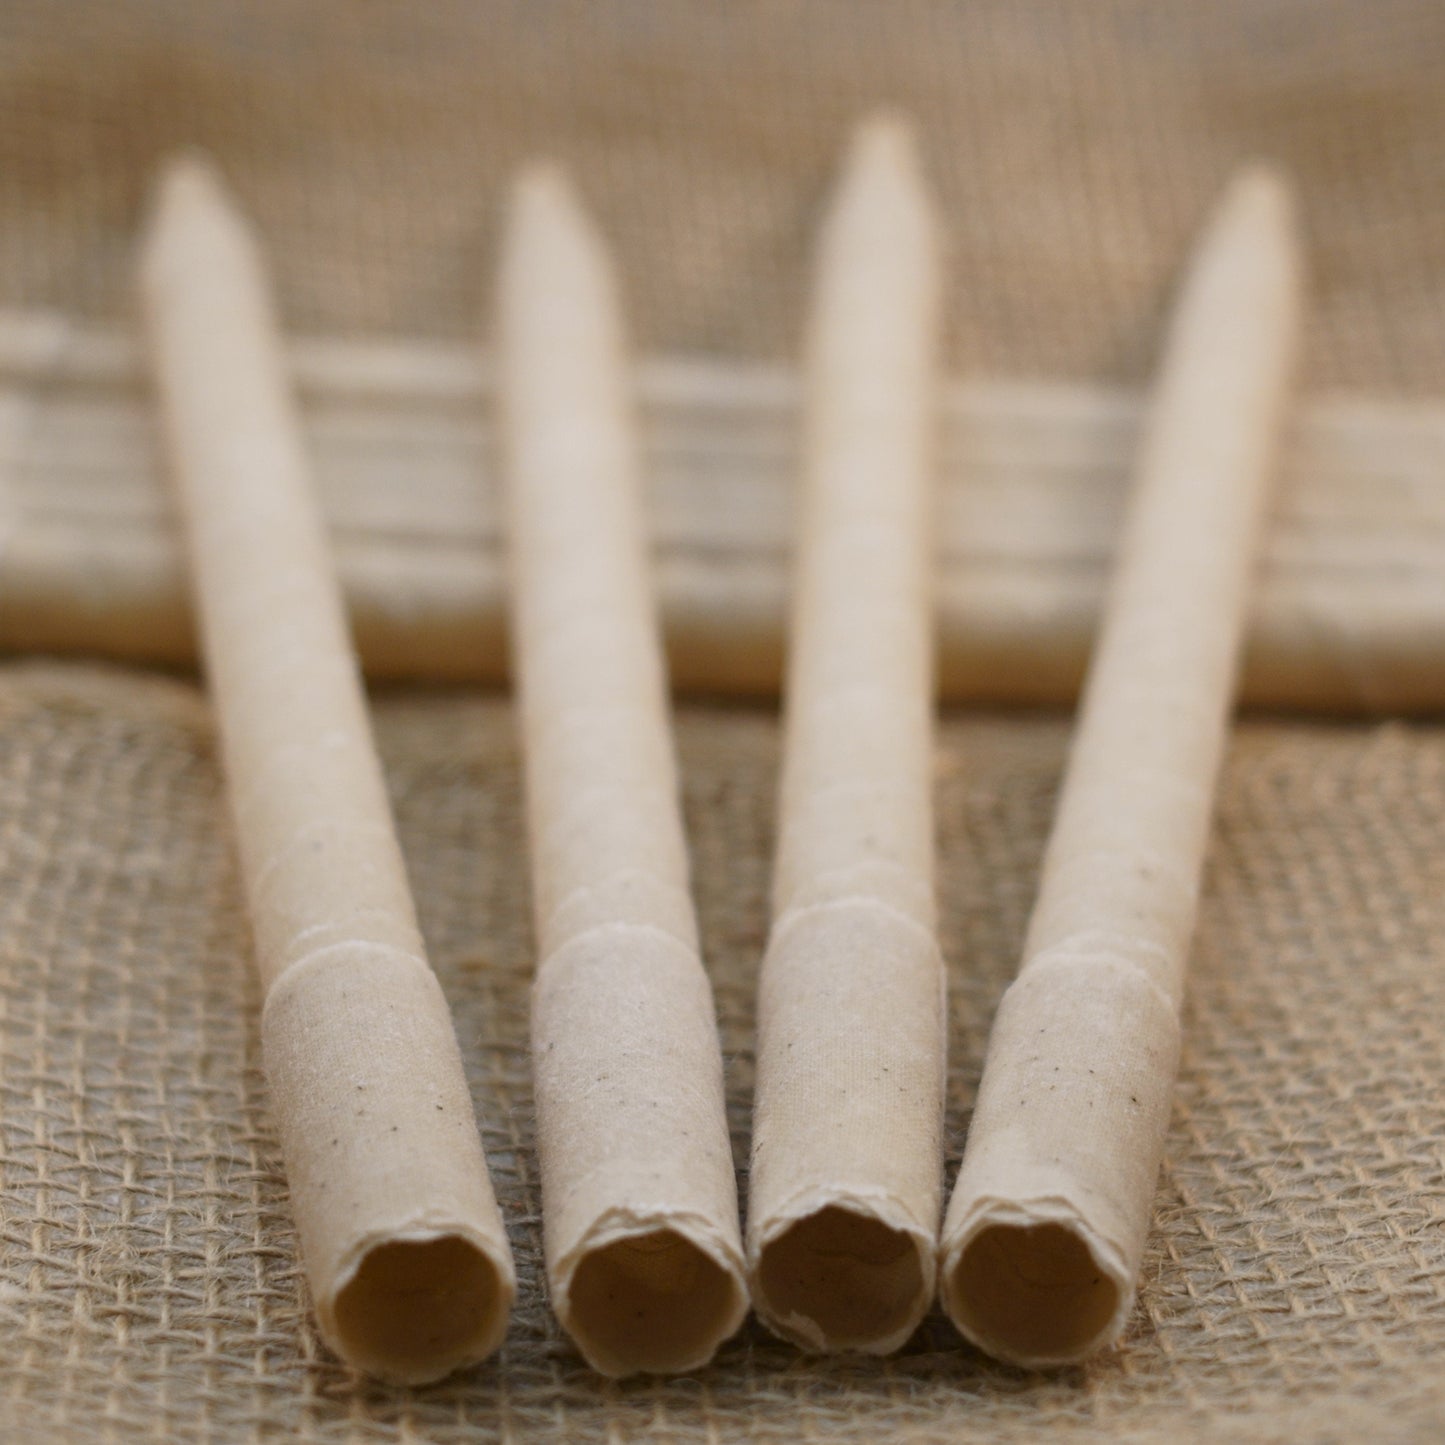 Herbal Ear Candles Infused w/Lavender, Eucalyptus, & Tea Tree Essential Oils - Made in the USA